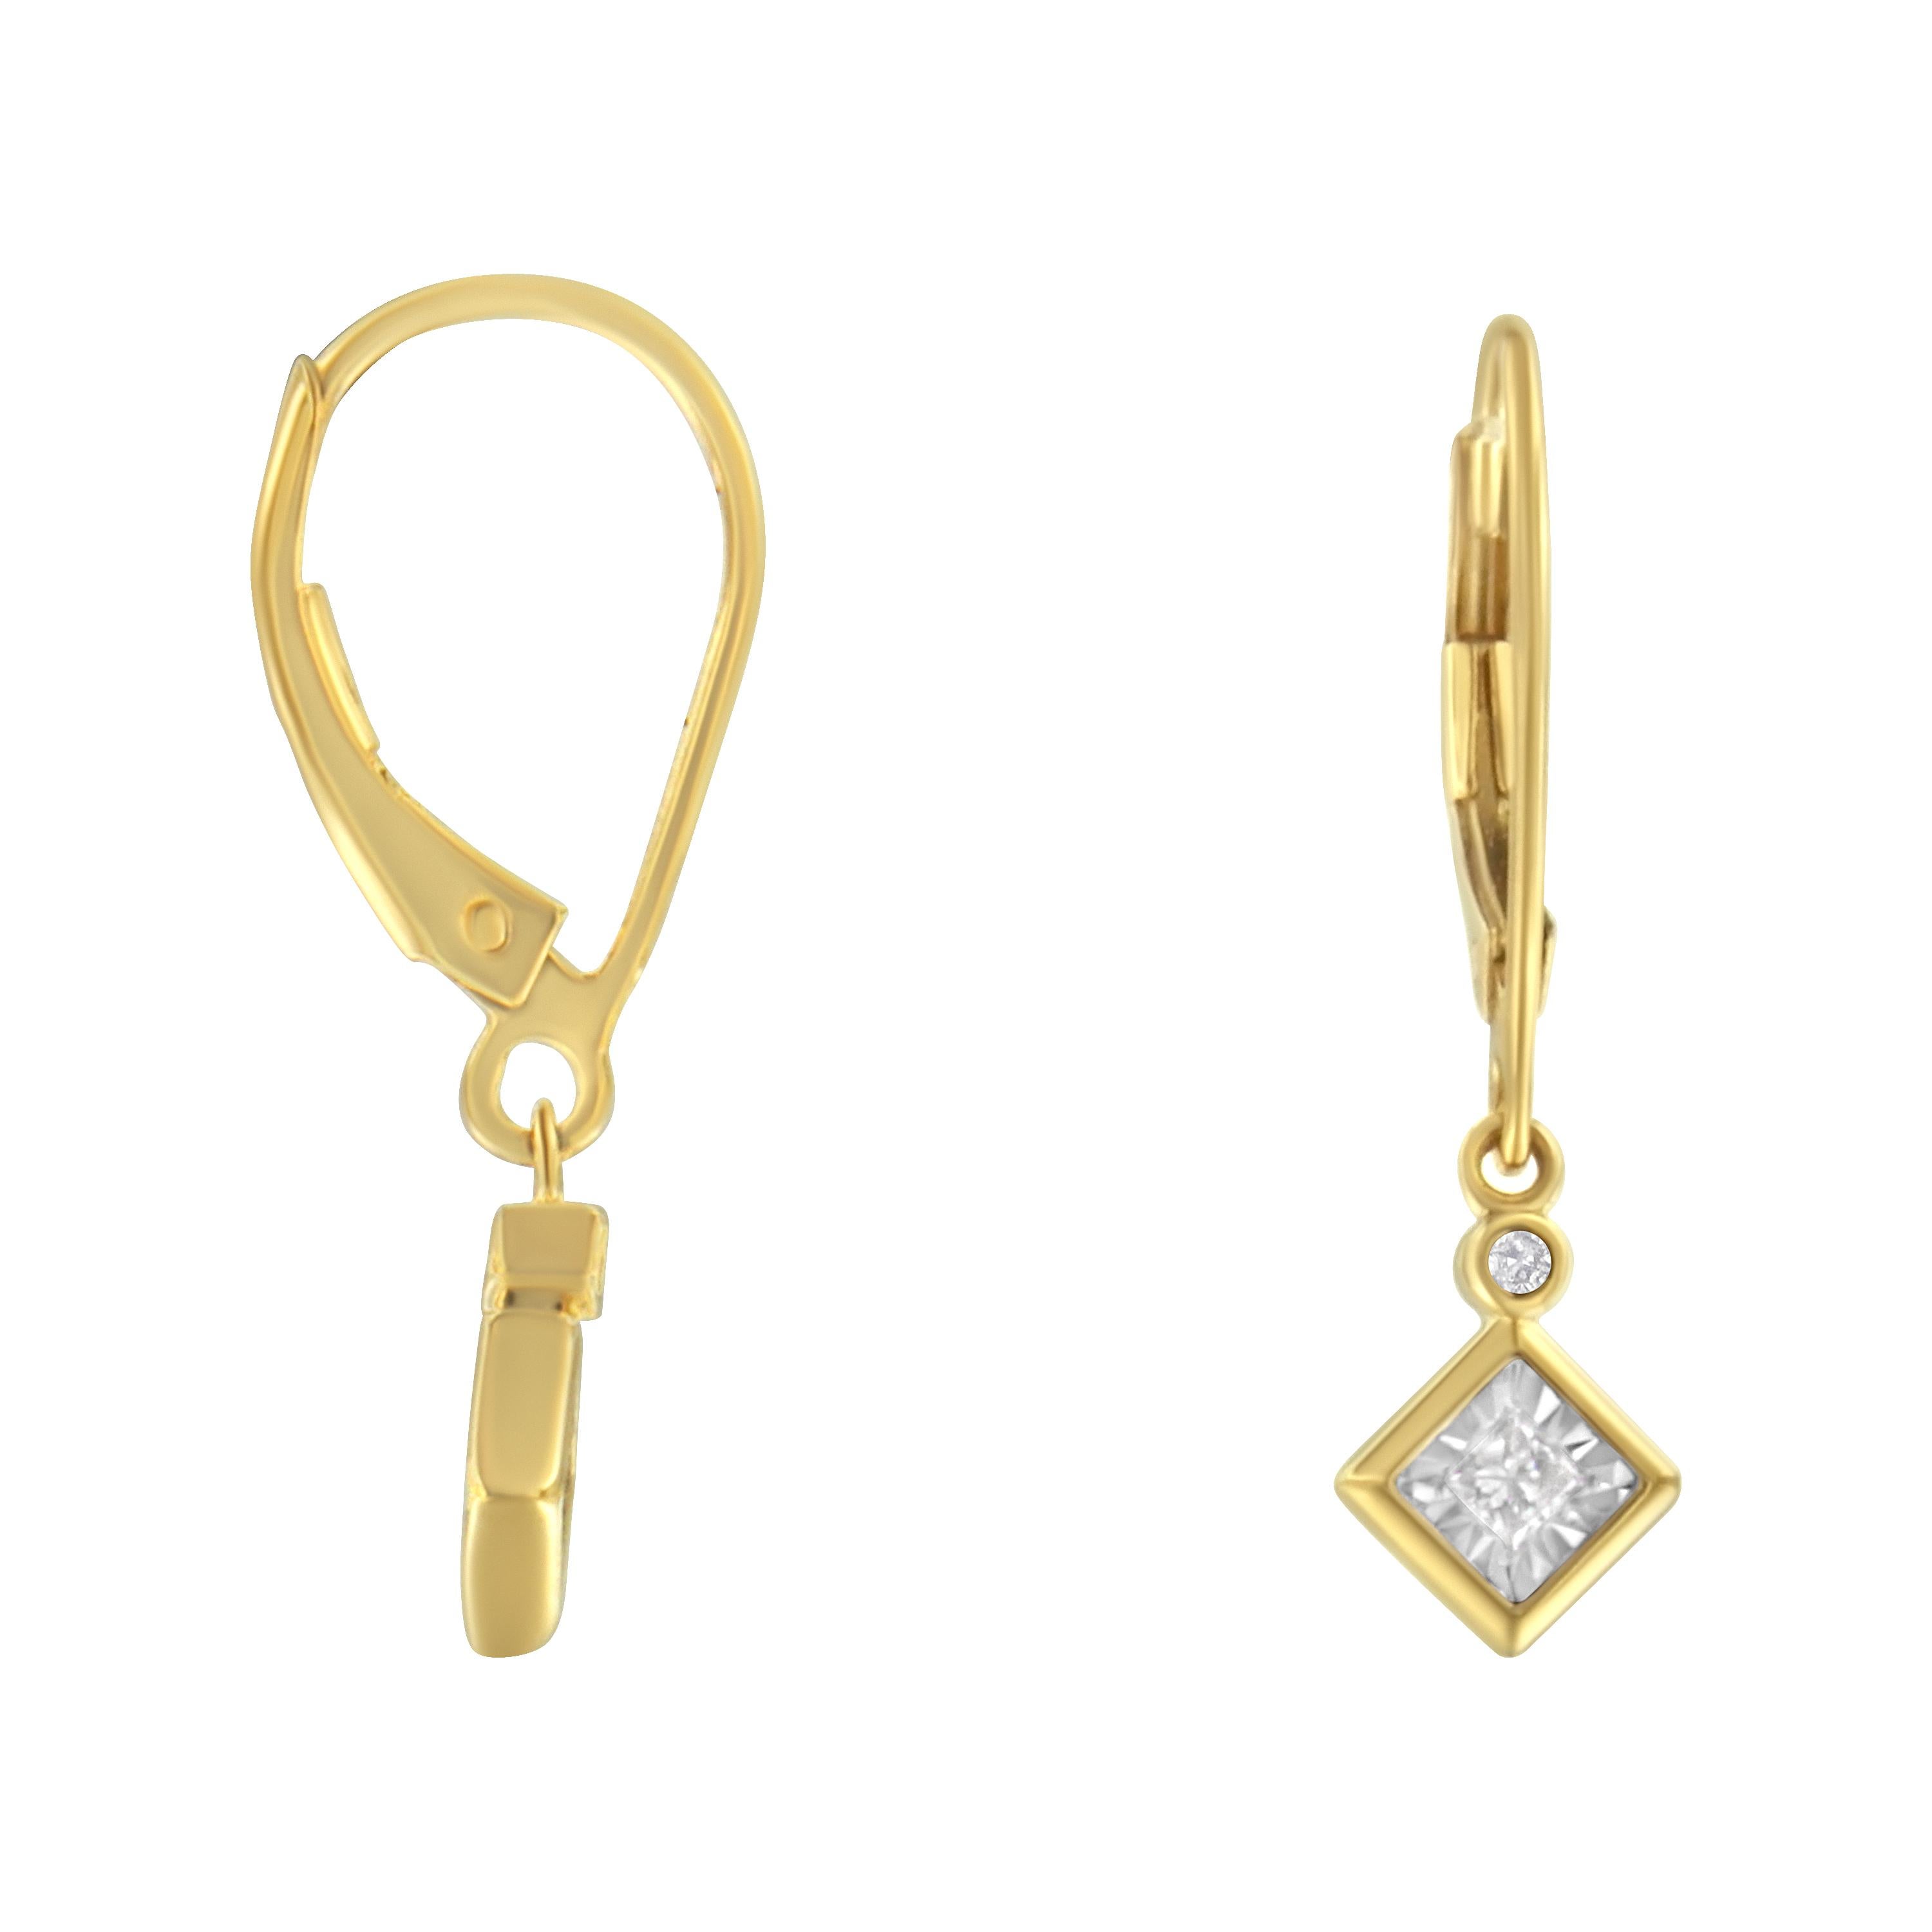 These lovely 14k yellow gold plated sterling silver dangle earrings feature 1/3ct of diamonds. A bezel set round diamond sits on top of a miracle set princess cut diamond. The small diamond design dangles from a lever back hook and adds the perfect